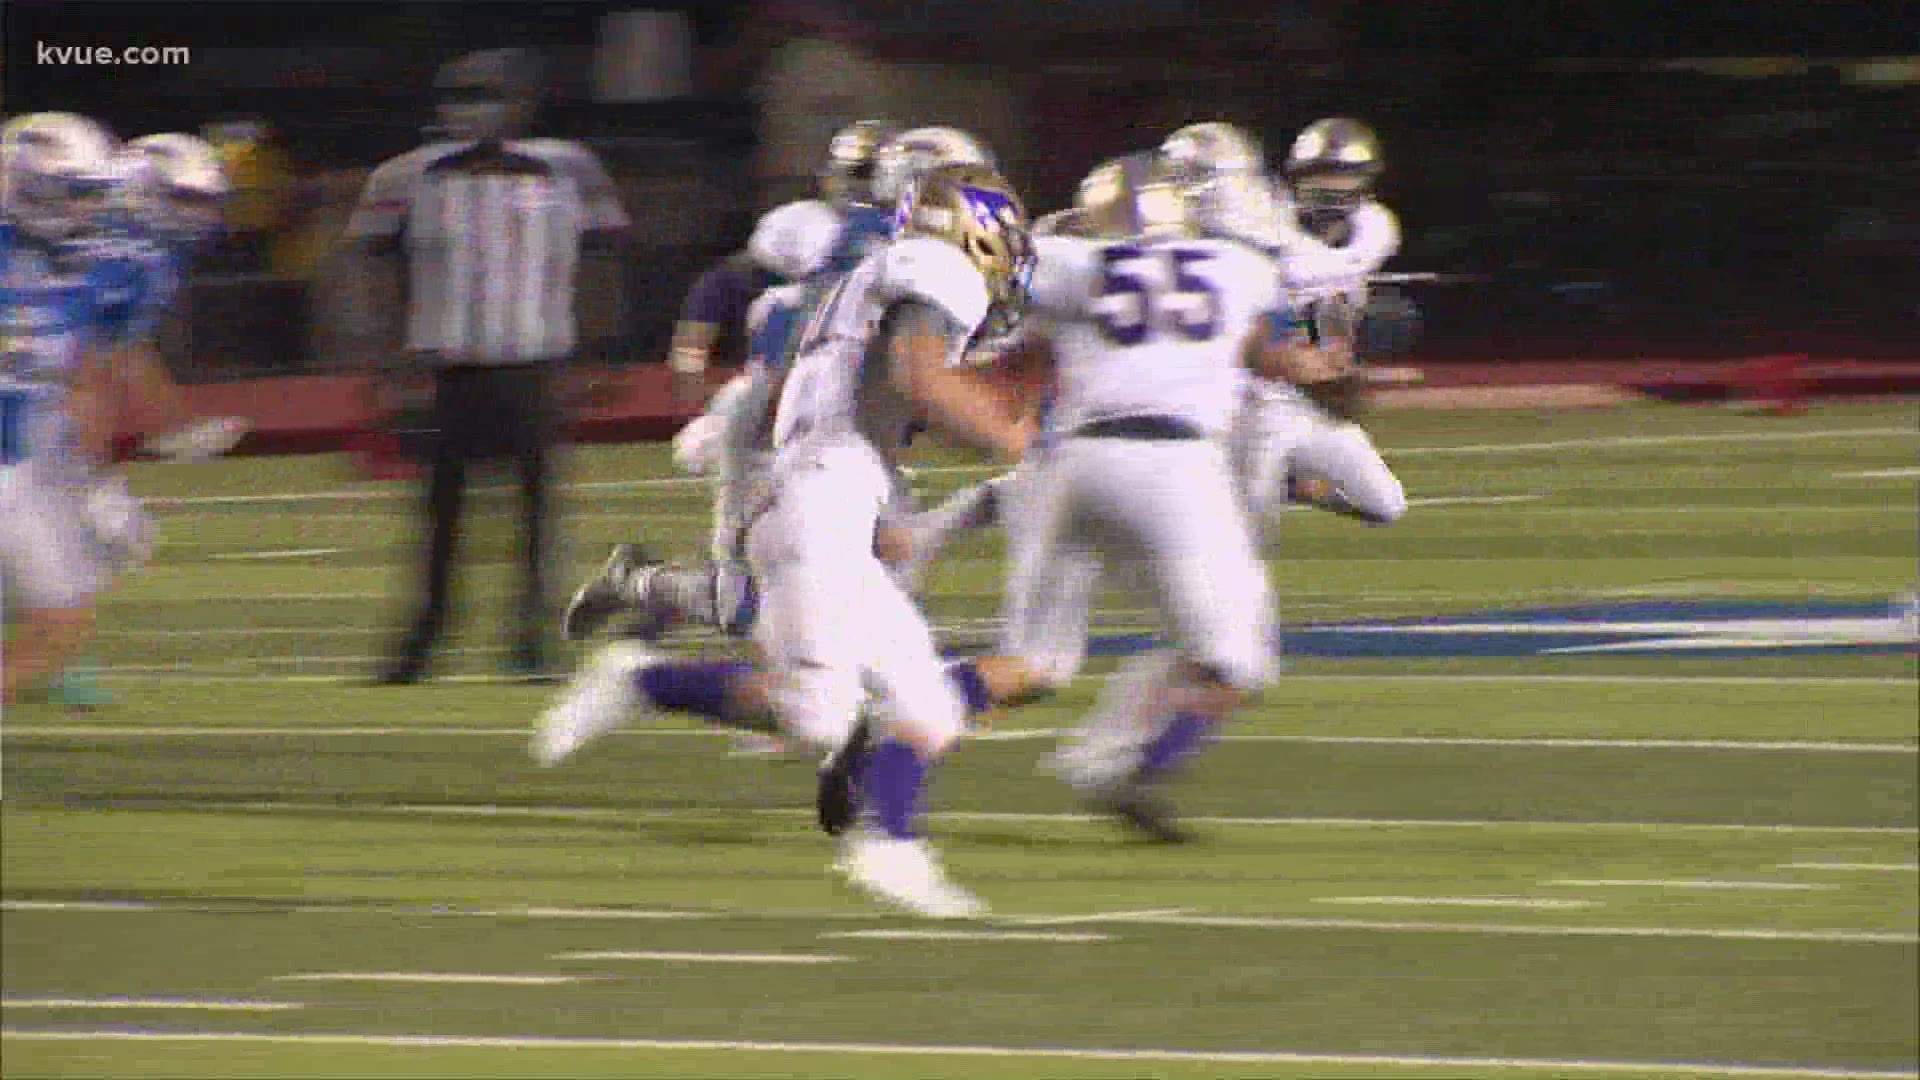 The Marble Falls Mustangs and Liberty Hill Panthers matchup is KVUE's Game of the Week!